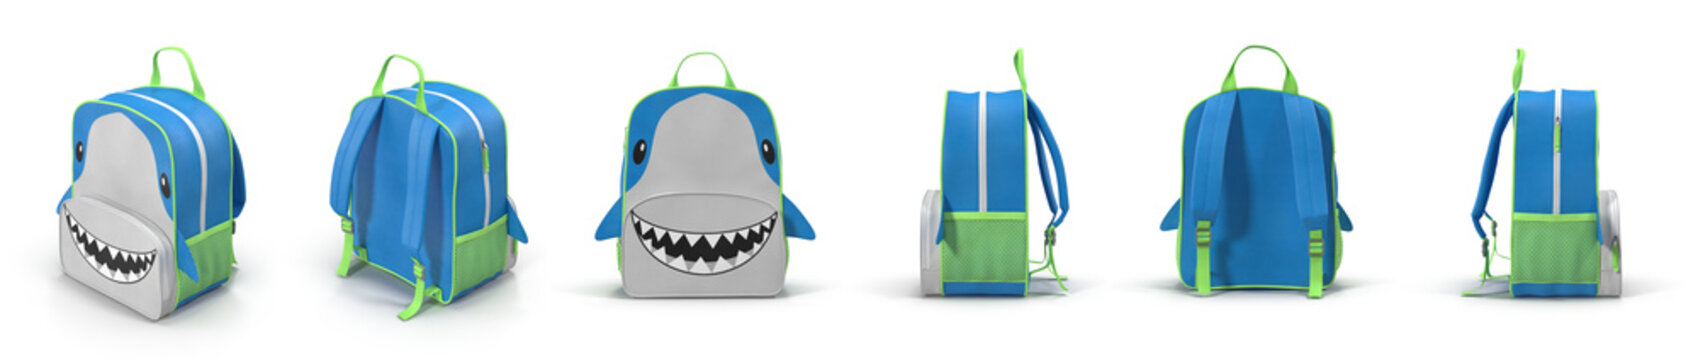 Boys Shark School Backpack renders set from different angles on a white. 3D illustration